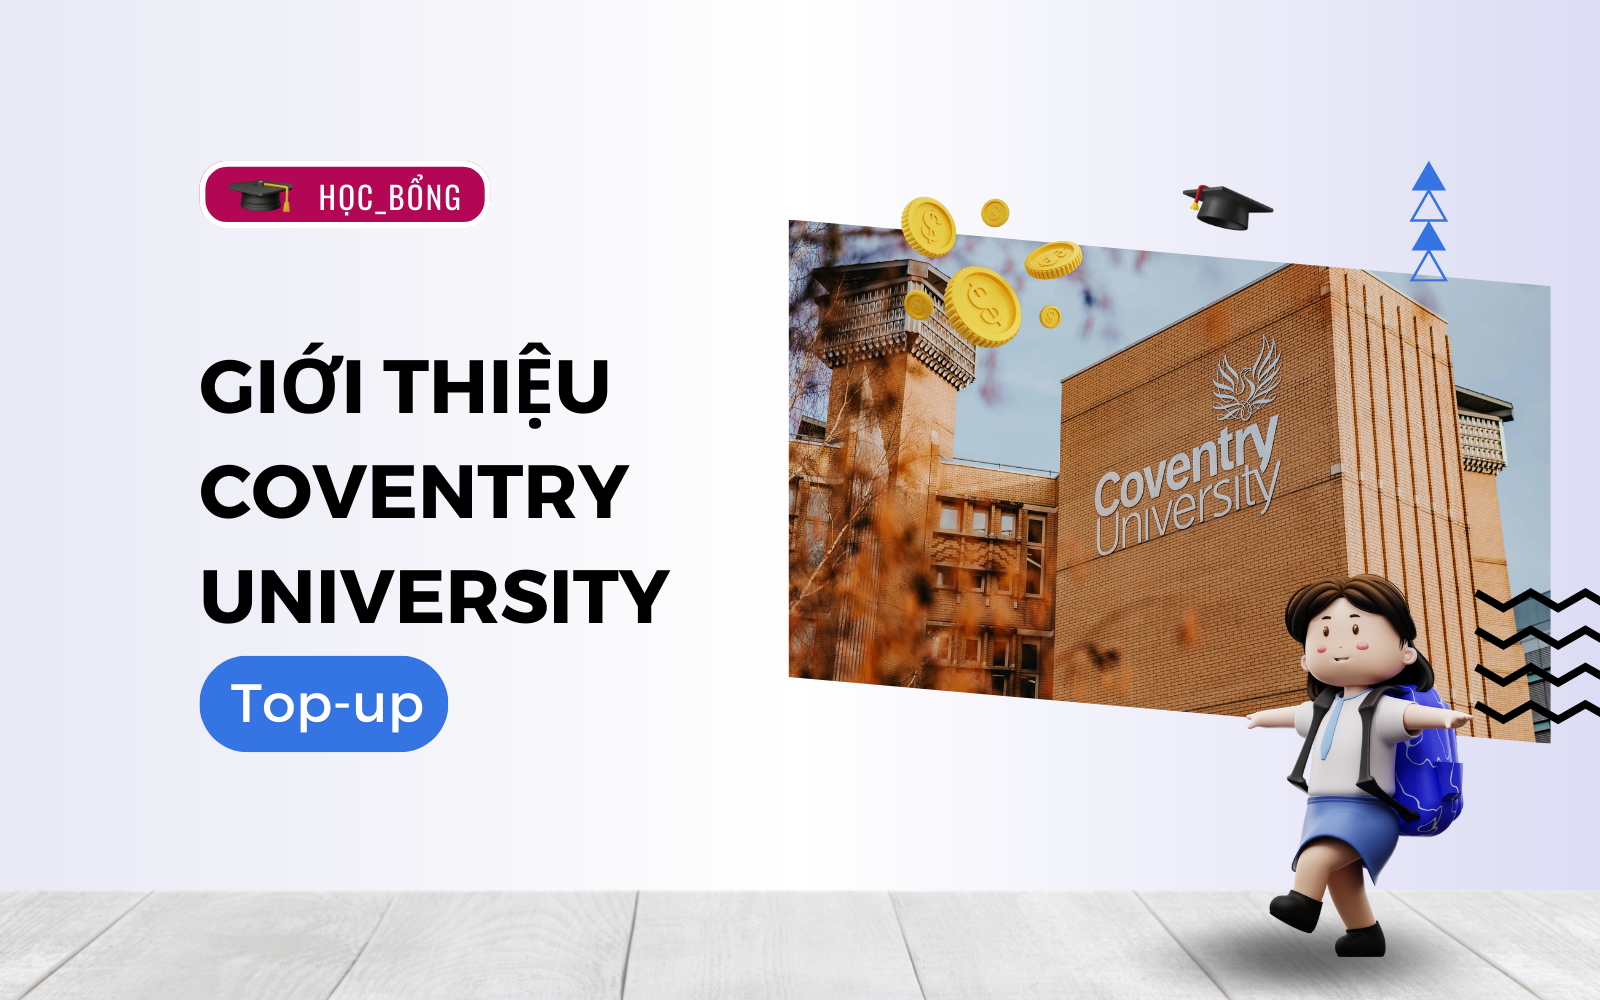 Top-up coventry university